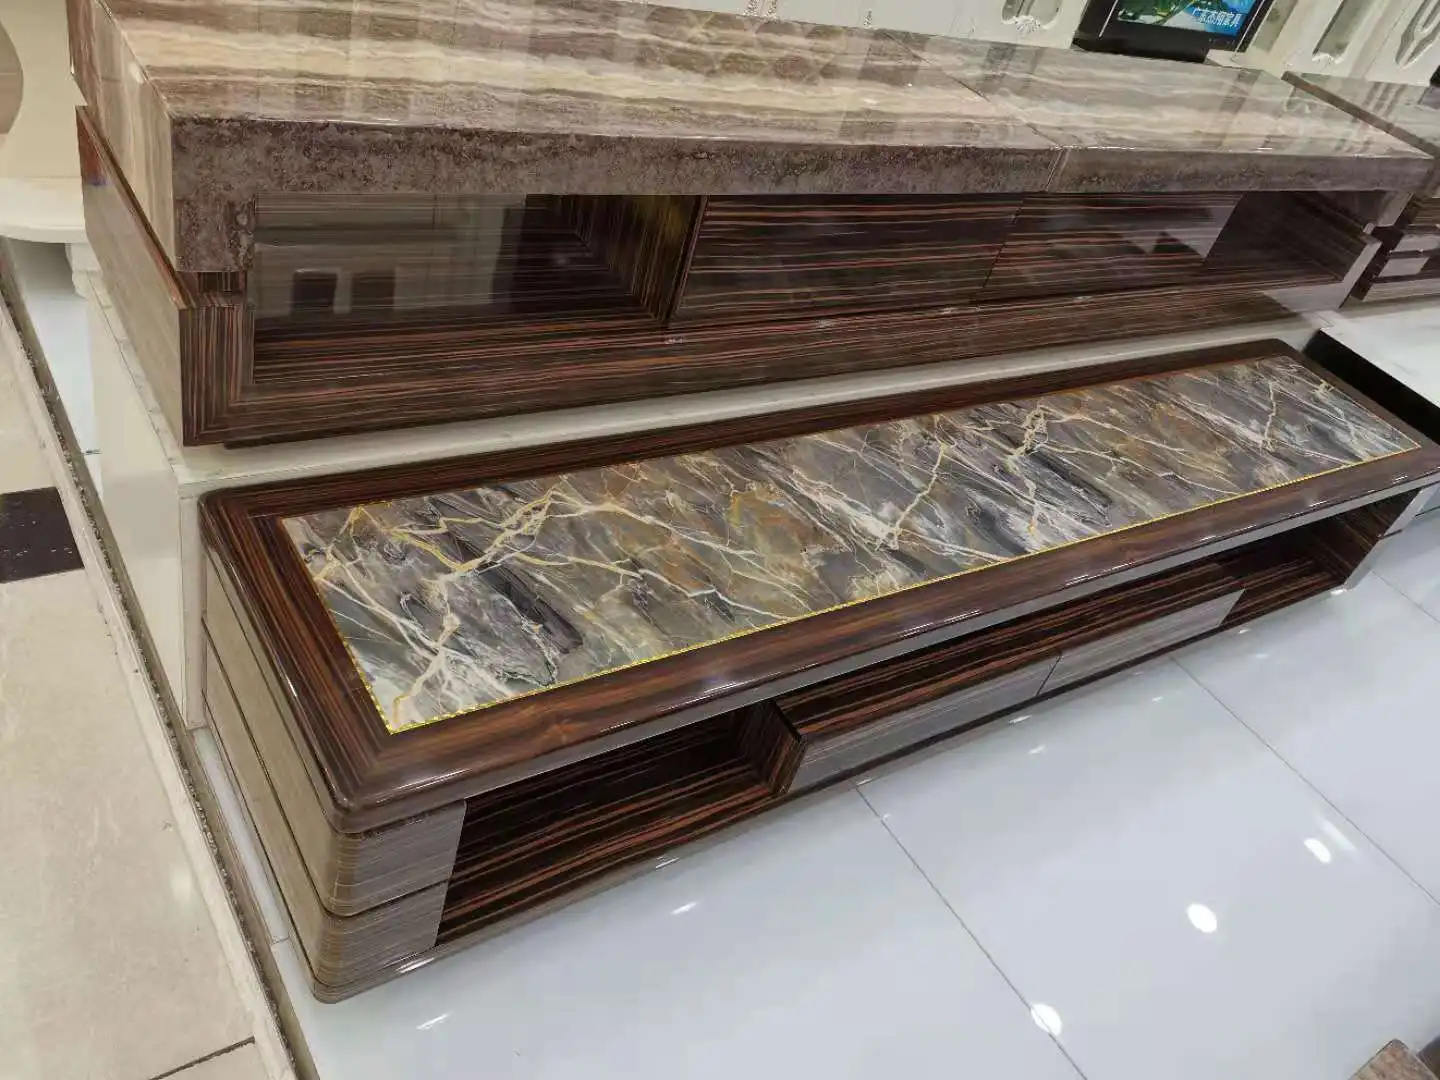 Source Hot Sale Modern Brown wooden coffee table marble center ...